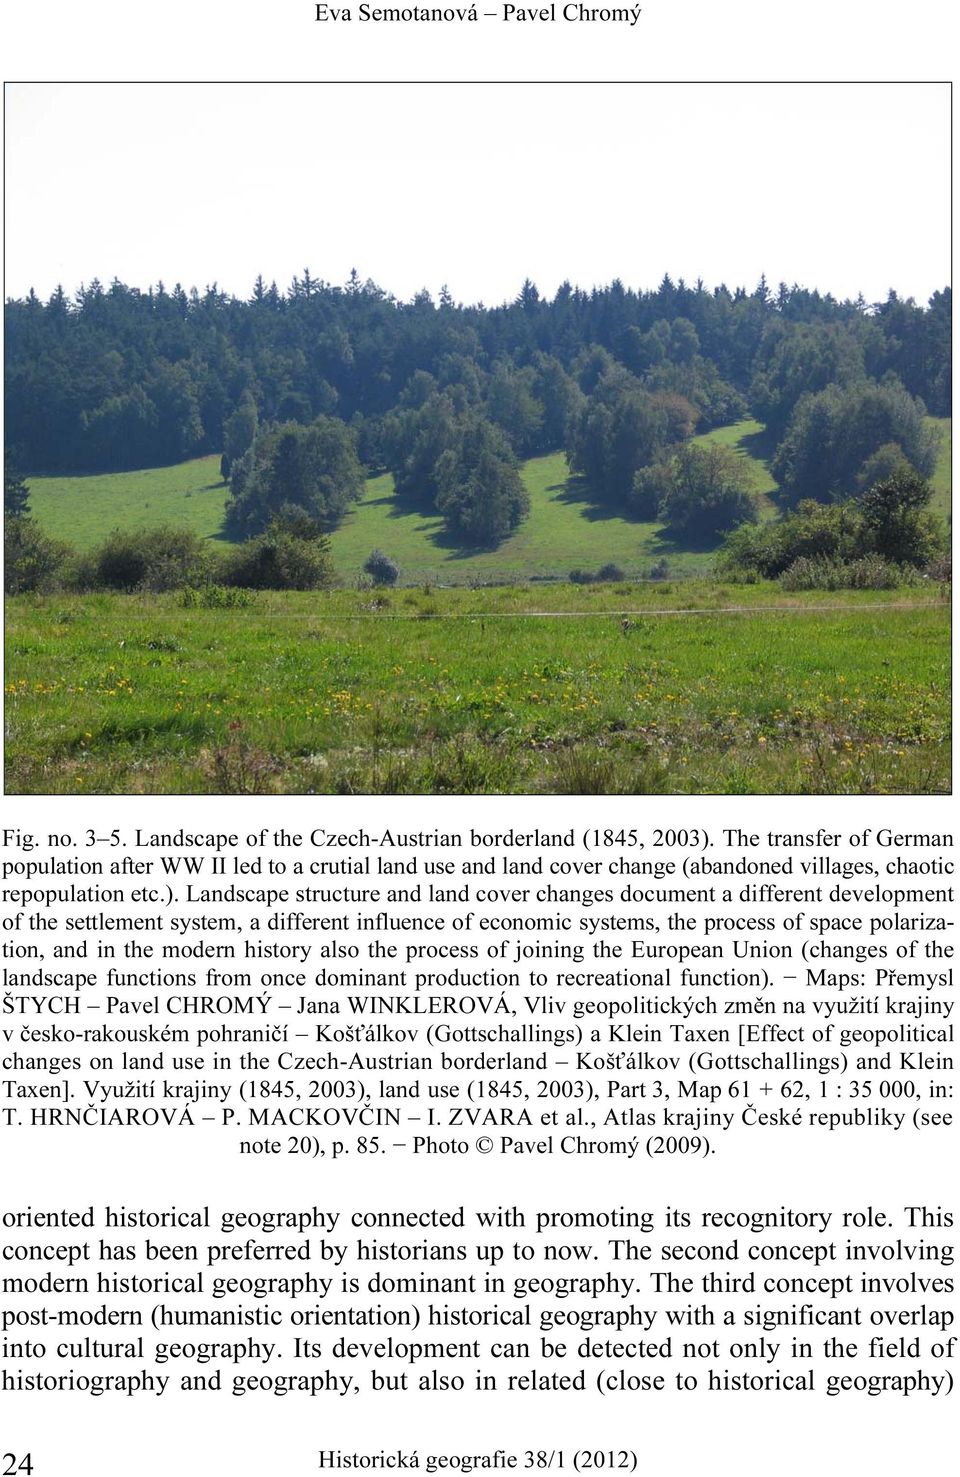 Landscape structure and land cover changes document a different development of the settlement system, a different influence of economic systems, the process of space polarization, and in the modern